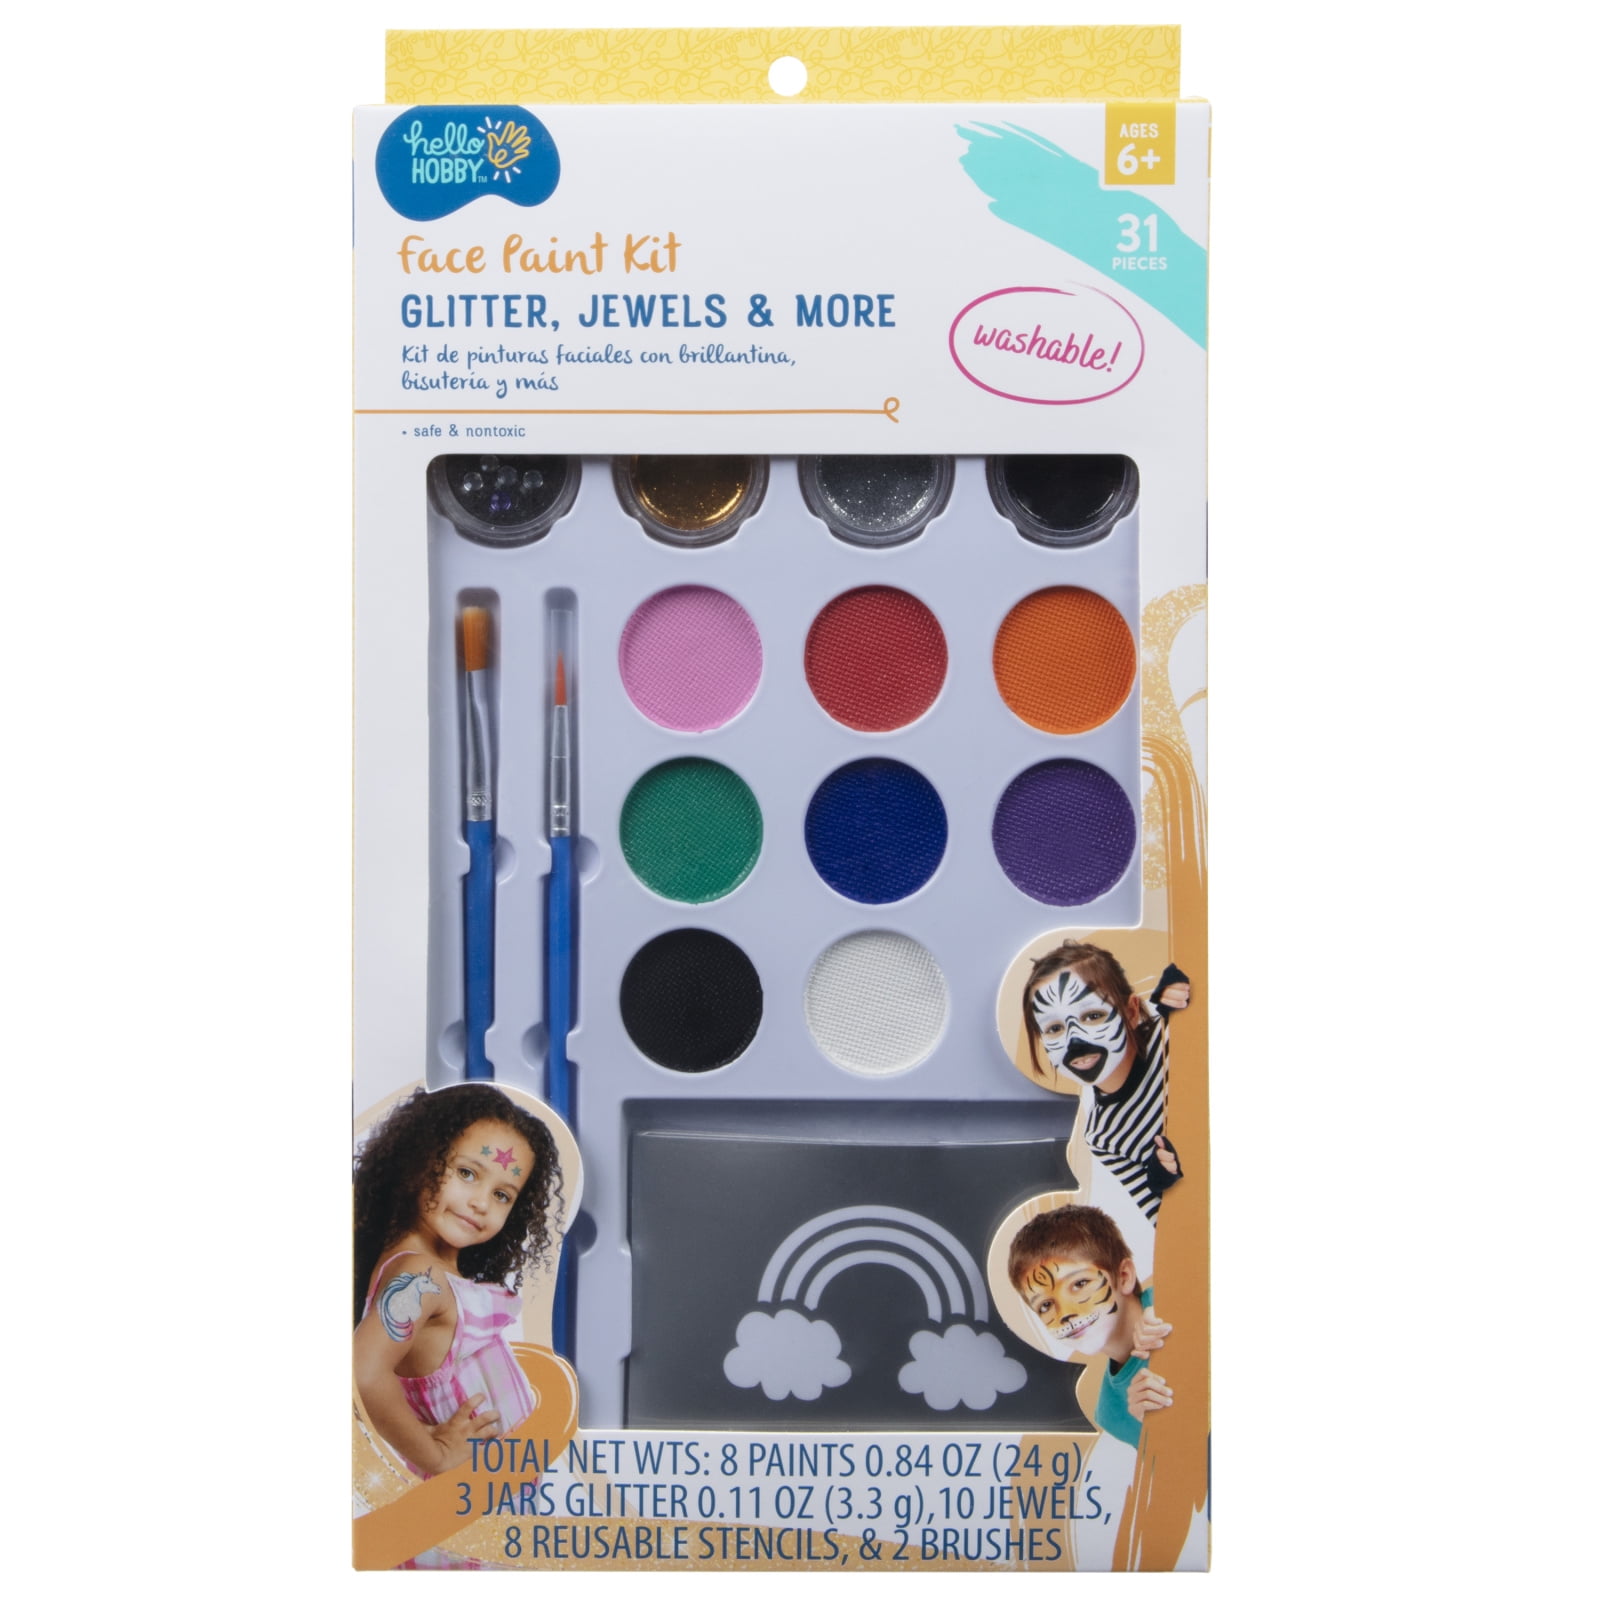 Face Paint Kit, Glitter Powder, Brushes, Sponges, and Stencils (10